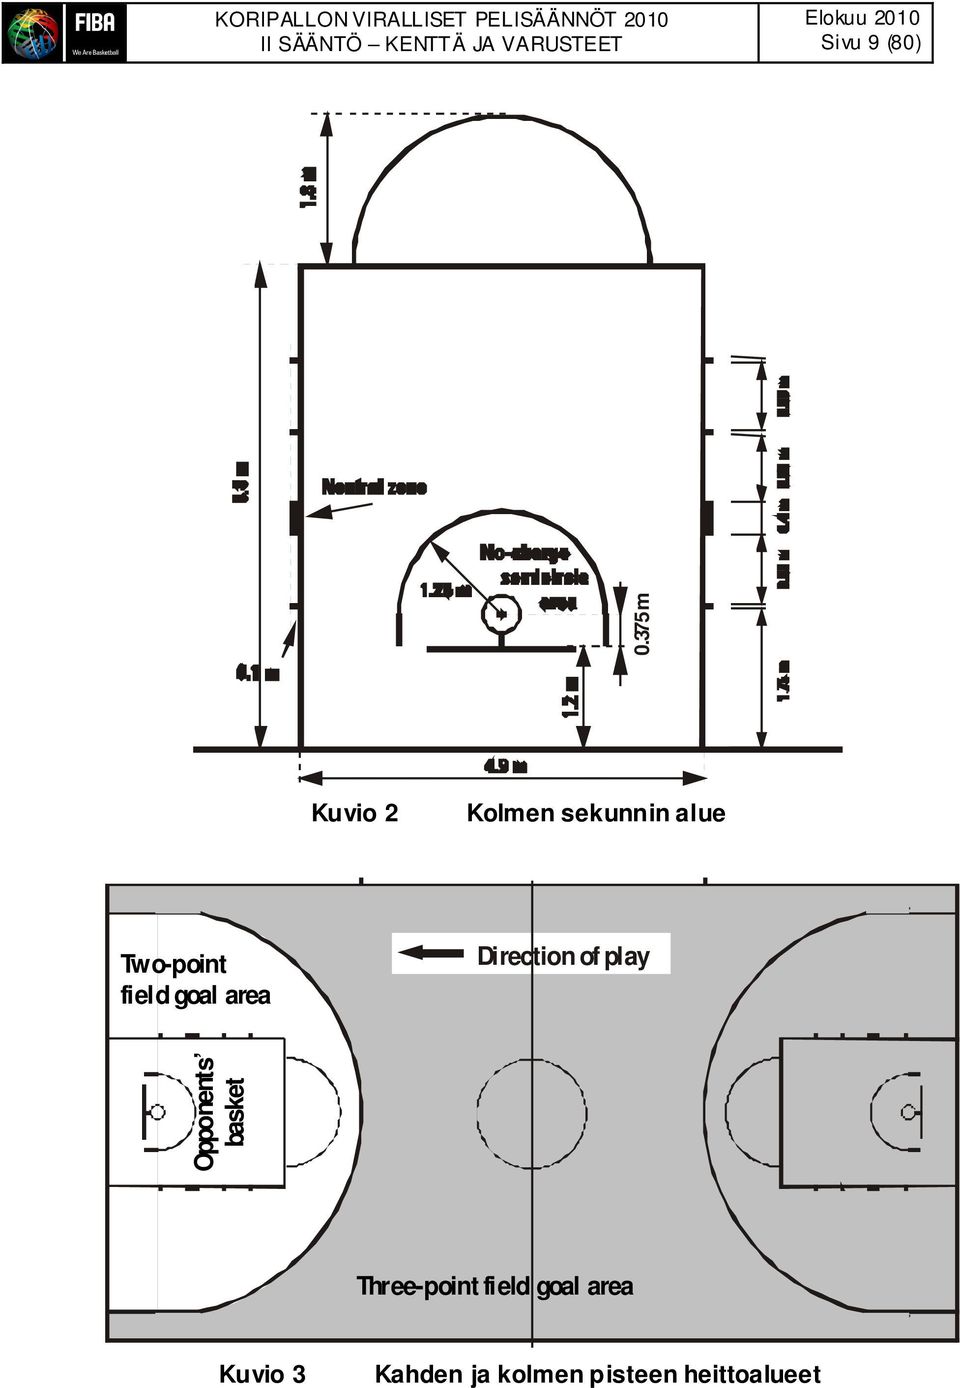 area Direction of play Opponents basket Three-point